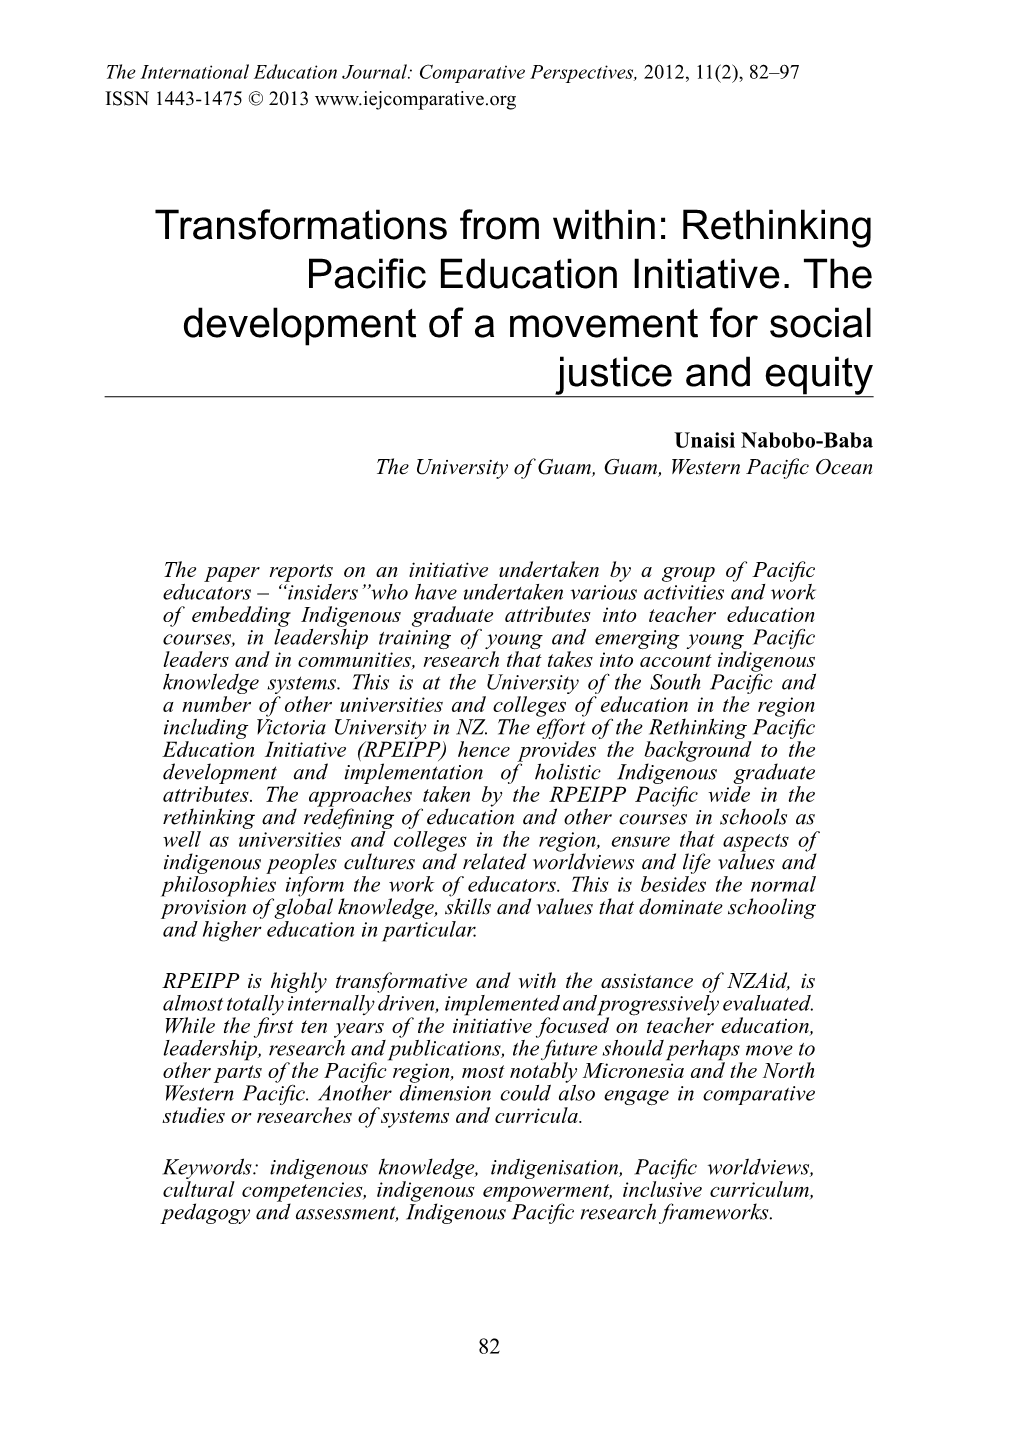 Rethinking Pacific Education Initiative. the Development of a Movement for Social Justice and Equity